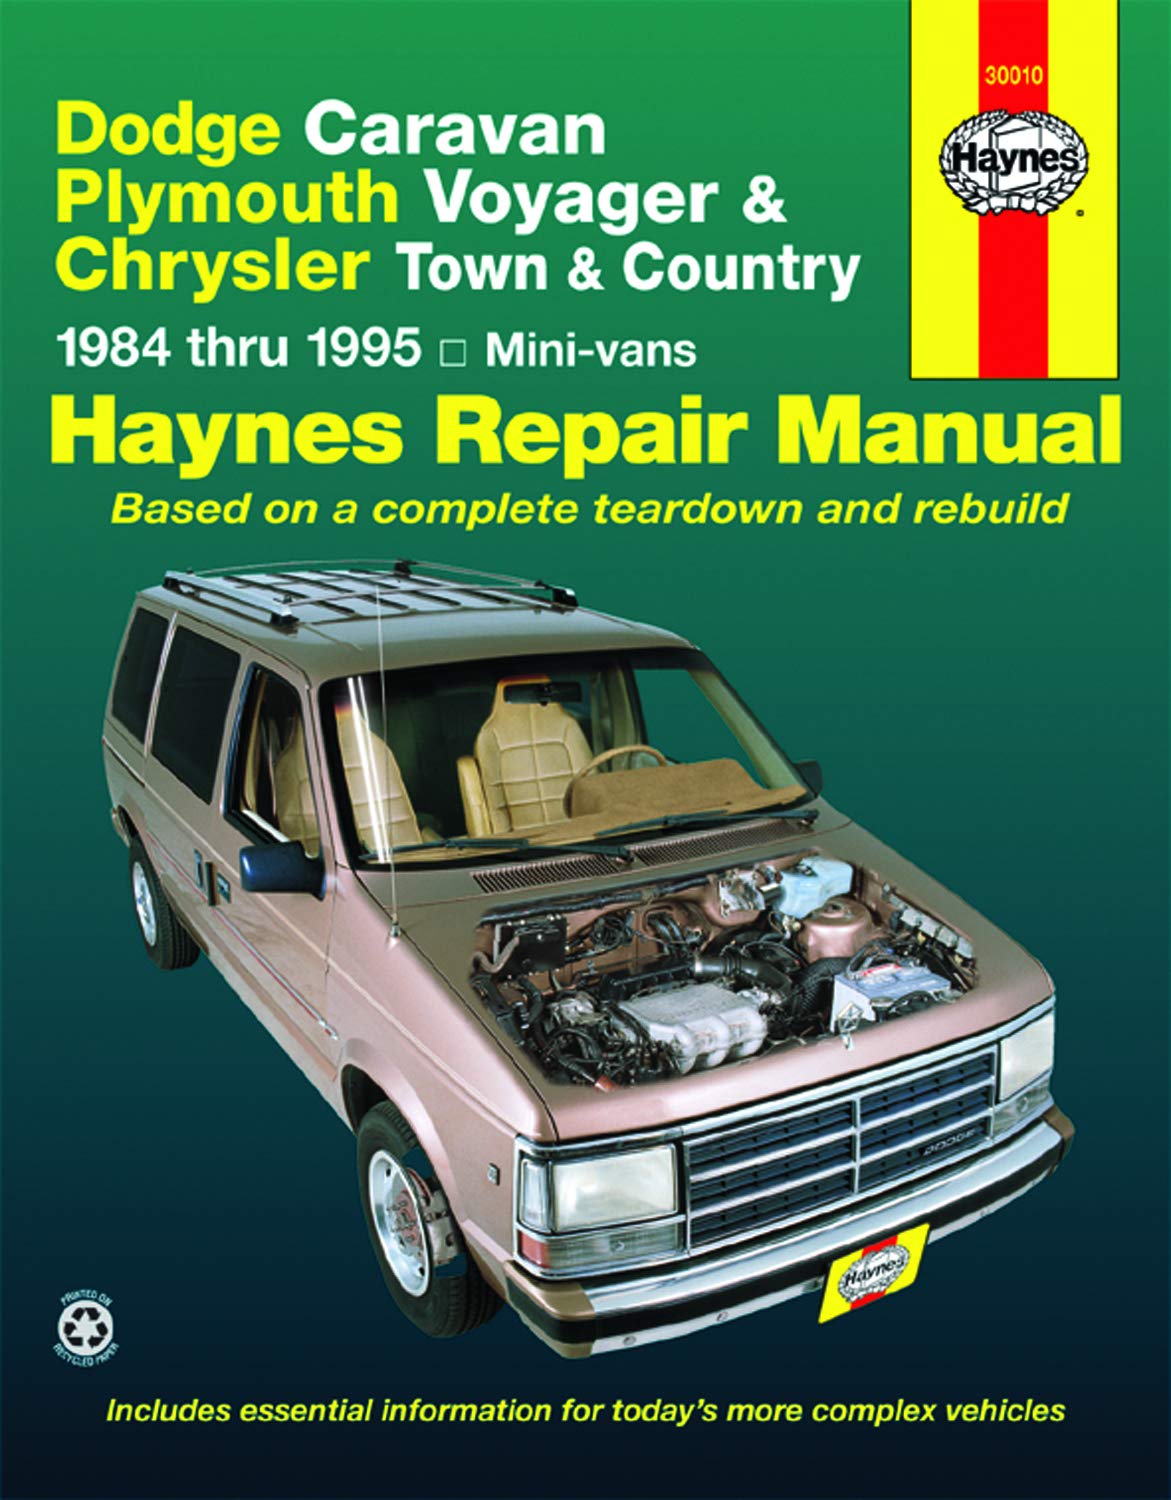 Livre ISBN 1563921324 Haynes # 30010 : Haynes Dodge, Plymouth and Chrysler Mini-Vans, 1984-1995: Caravan, Voyager, and Town and Country (Haynes)